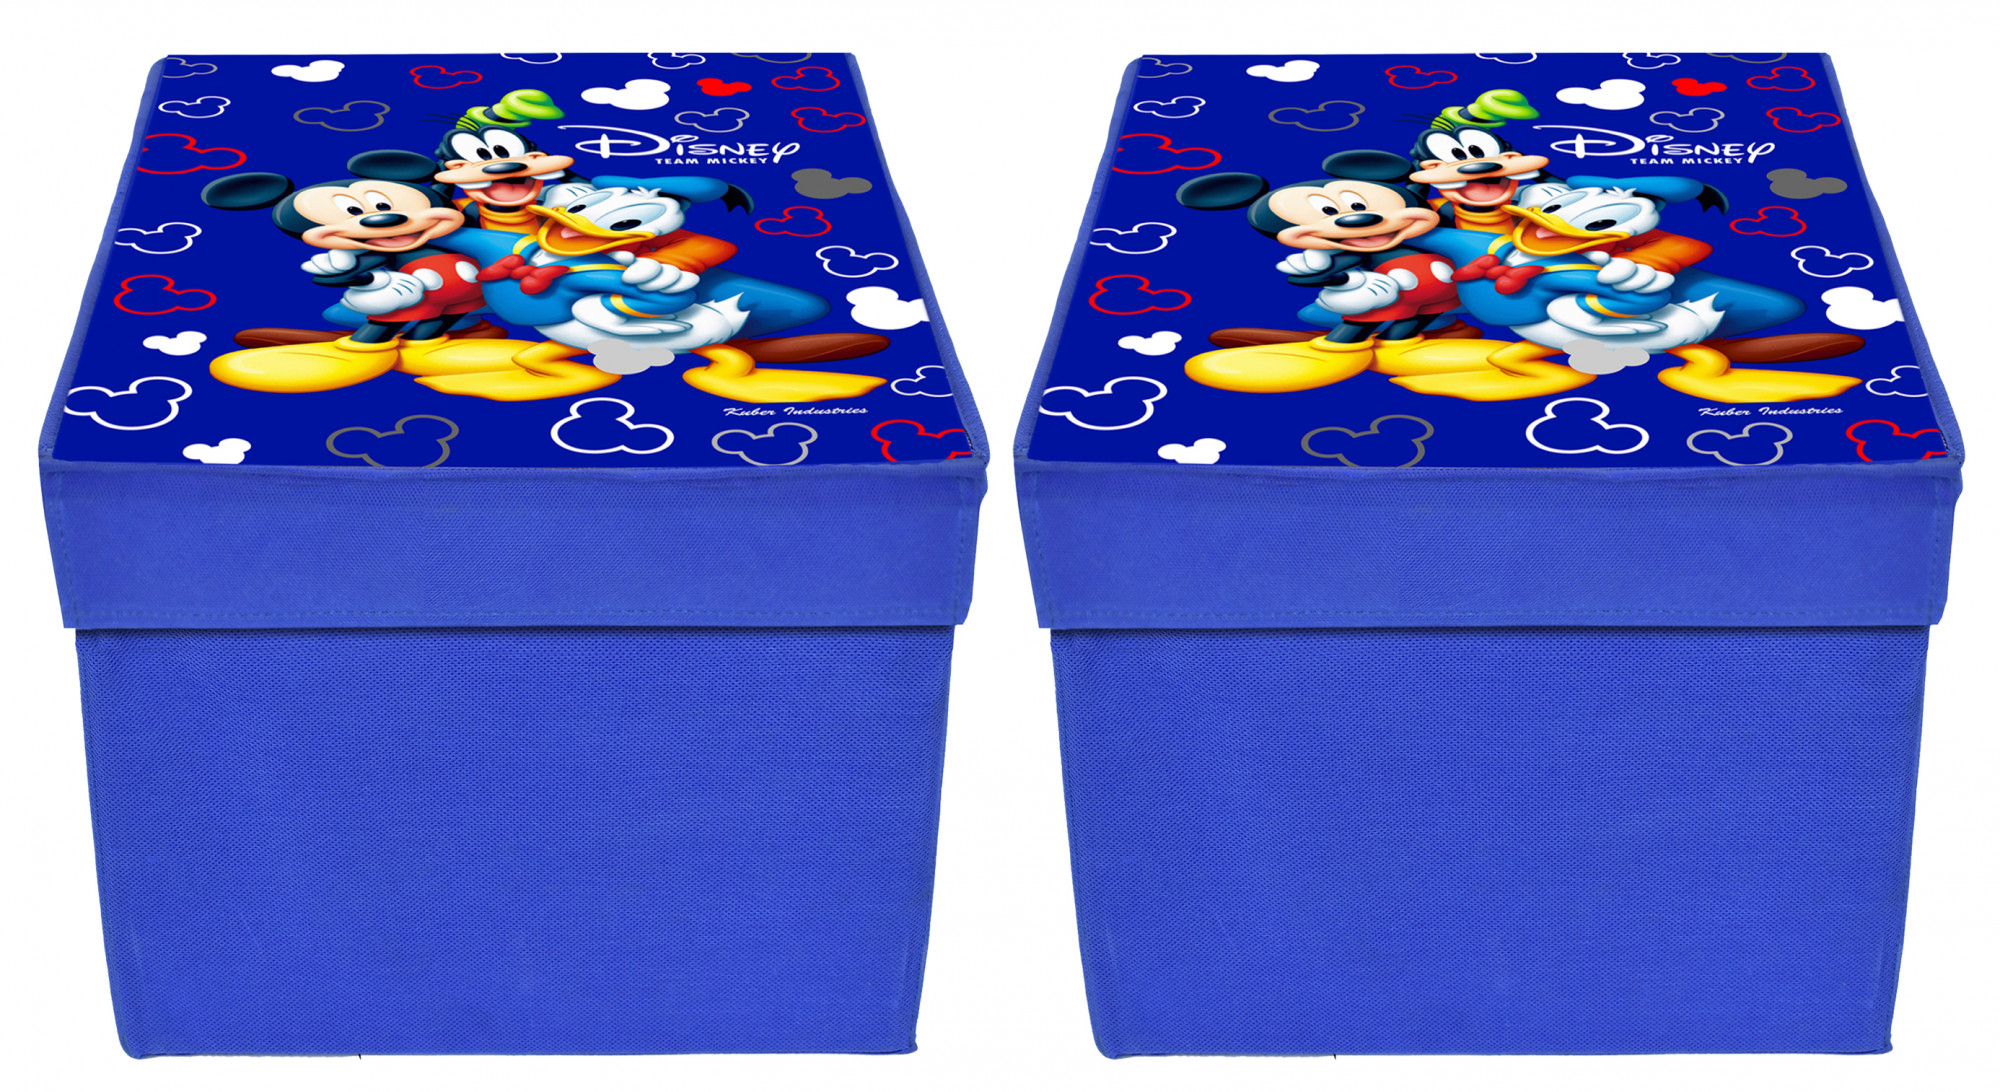 Kuber Industries Disney Tram Mickey Print Non Woven Fabric Foldable Shirt Cover Storage Organizer Box with With Lid, Extra Large (Royal Blue)-KUBMART3470